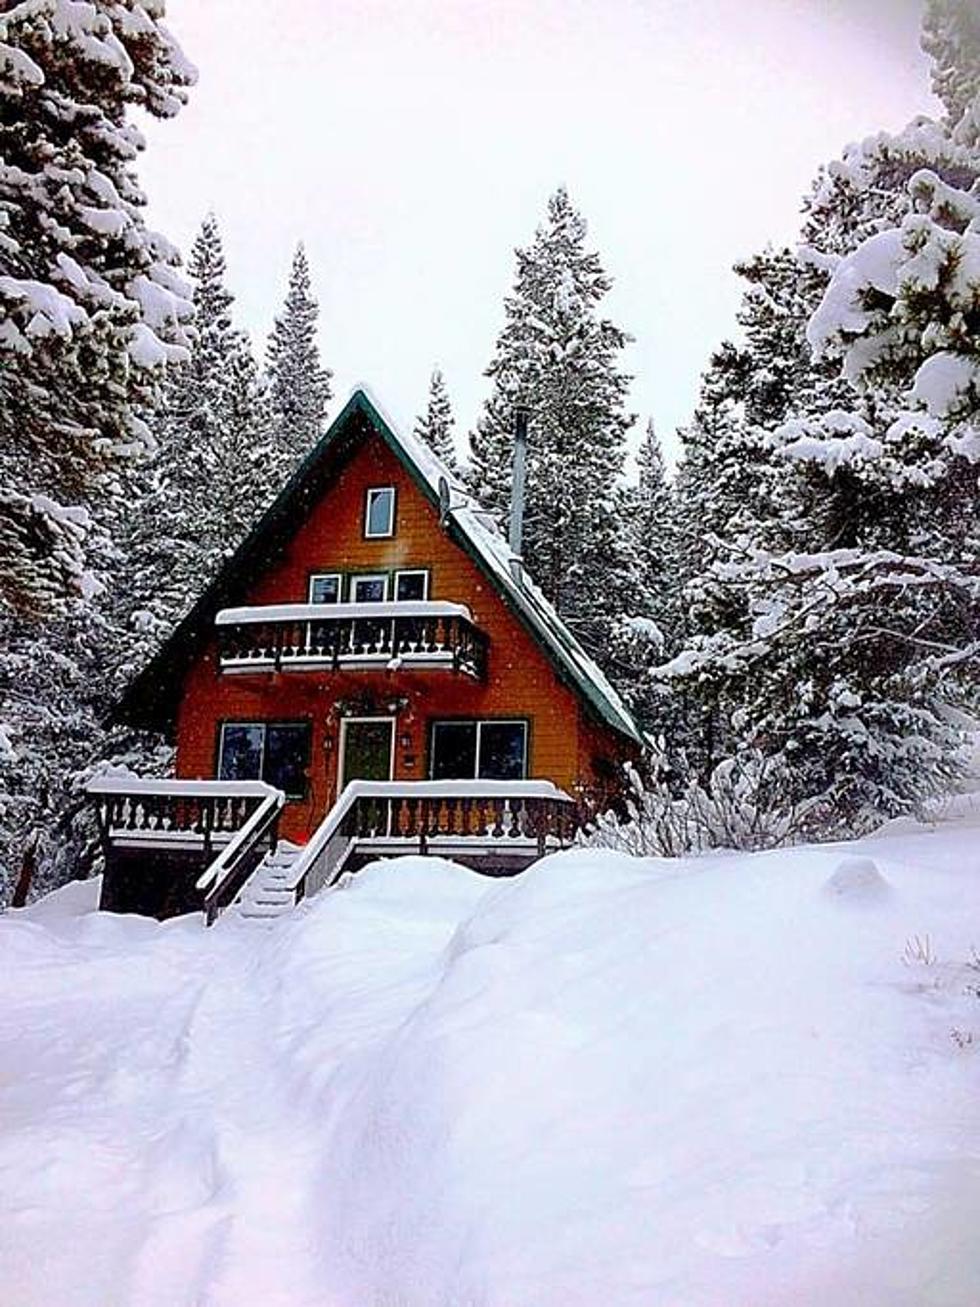 Six Cozy, Colorado Cabins You Can Rent for Under $100 a Night on Airbnb